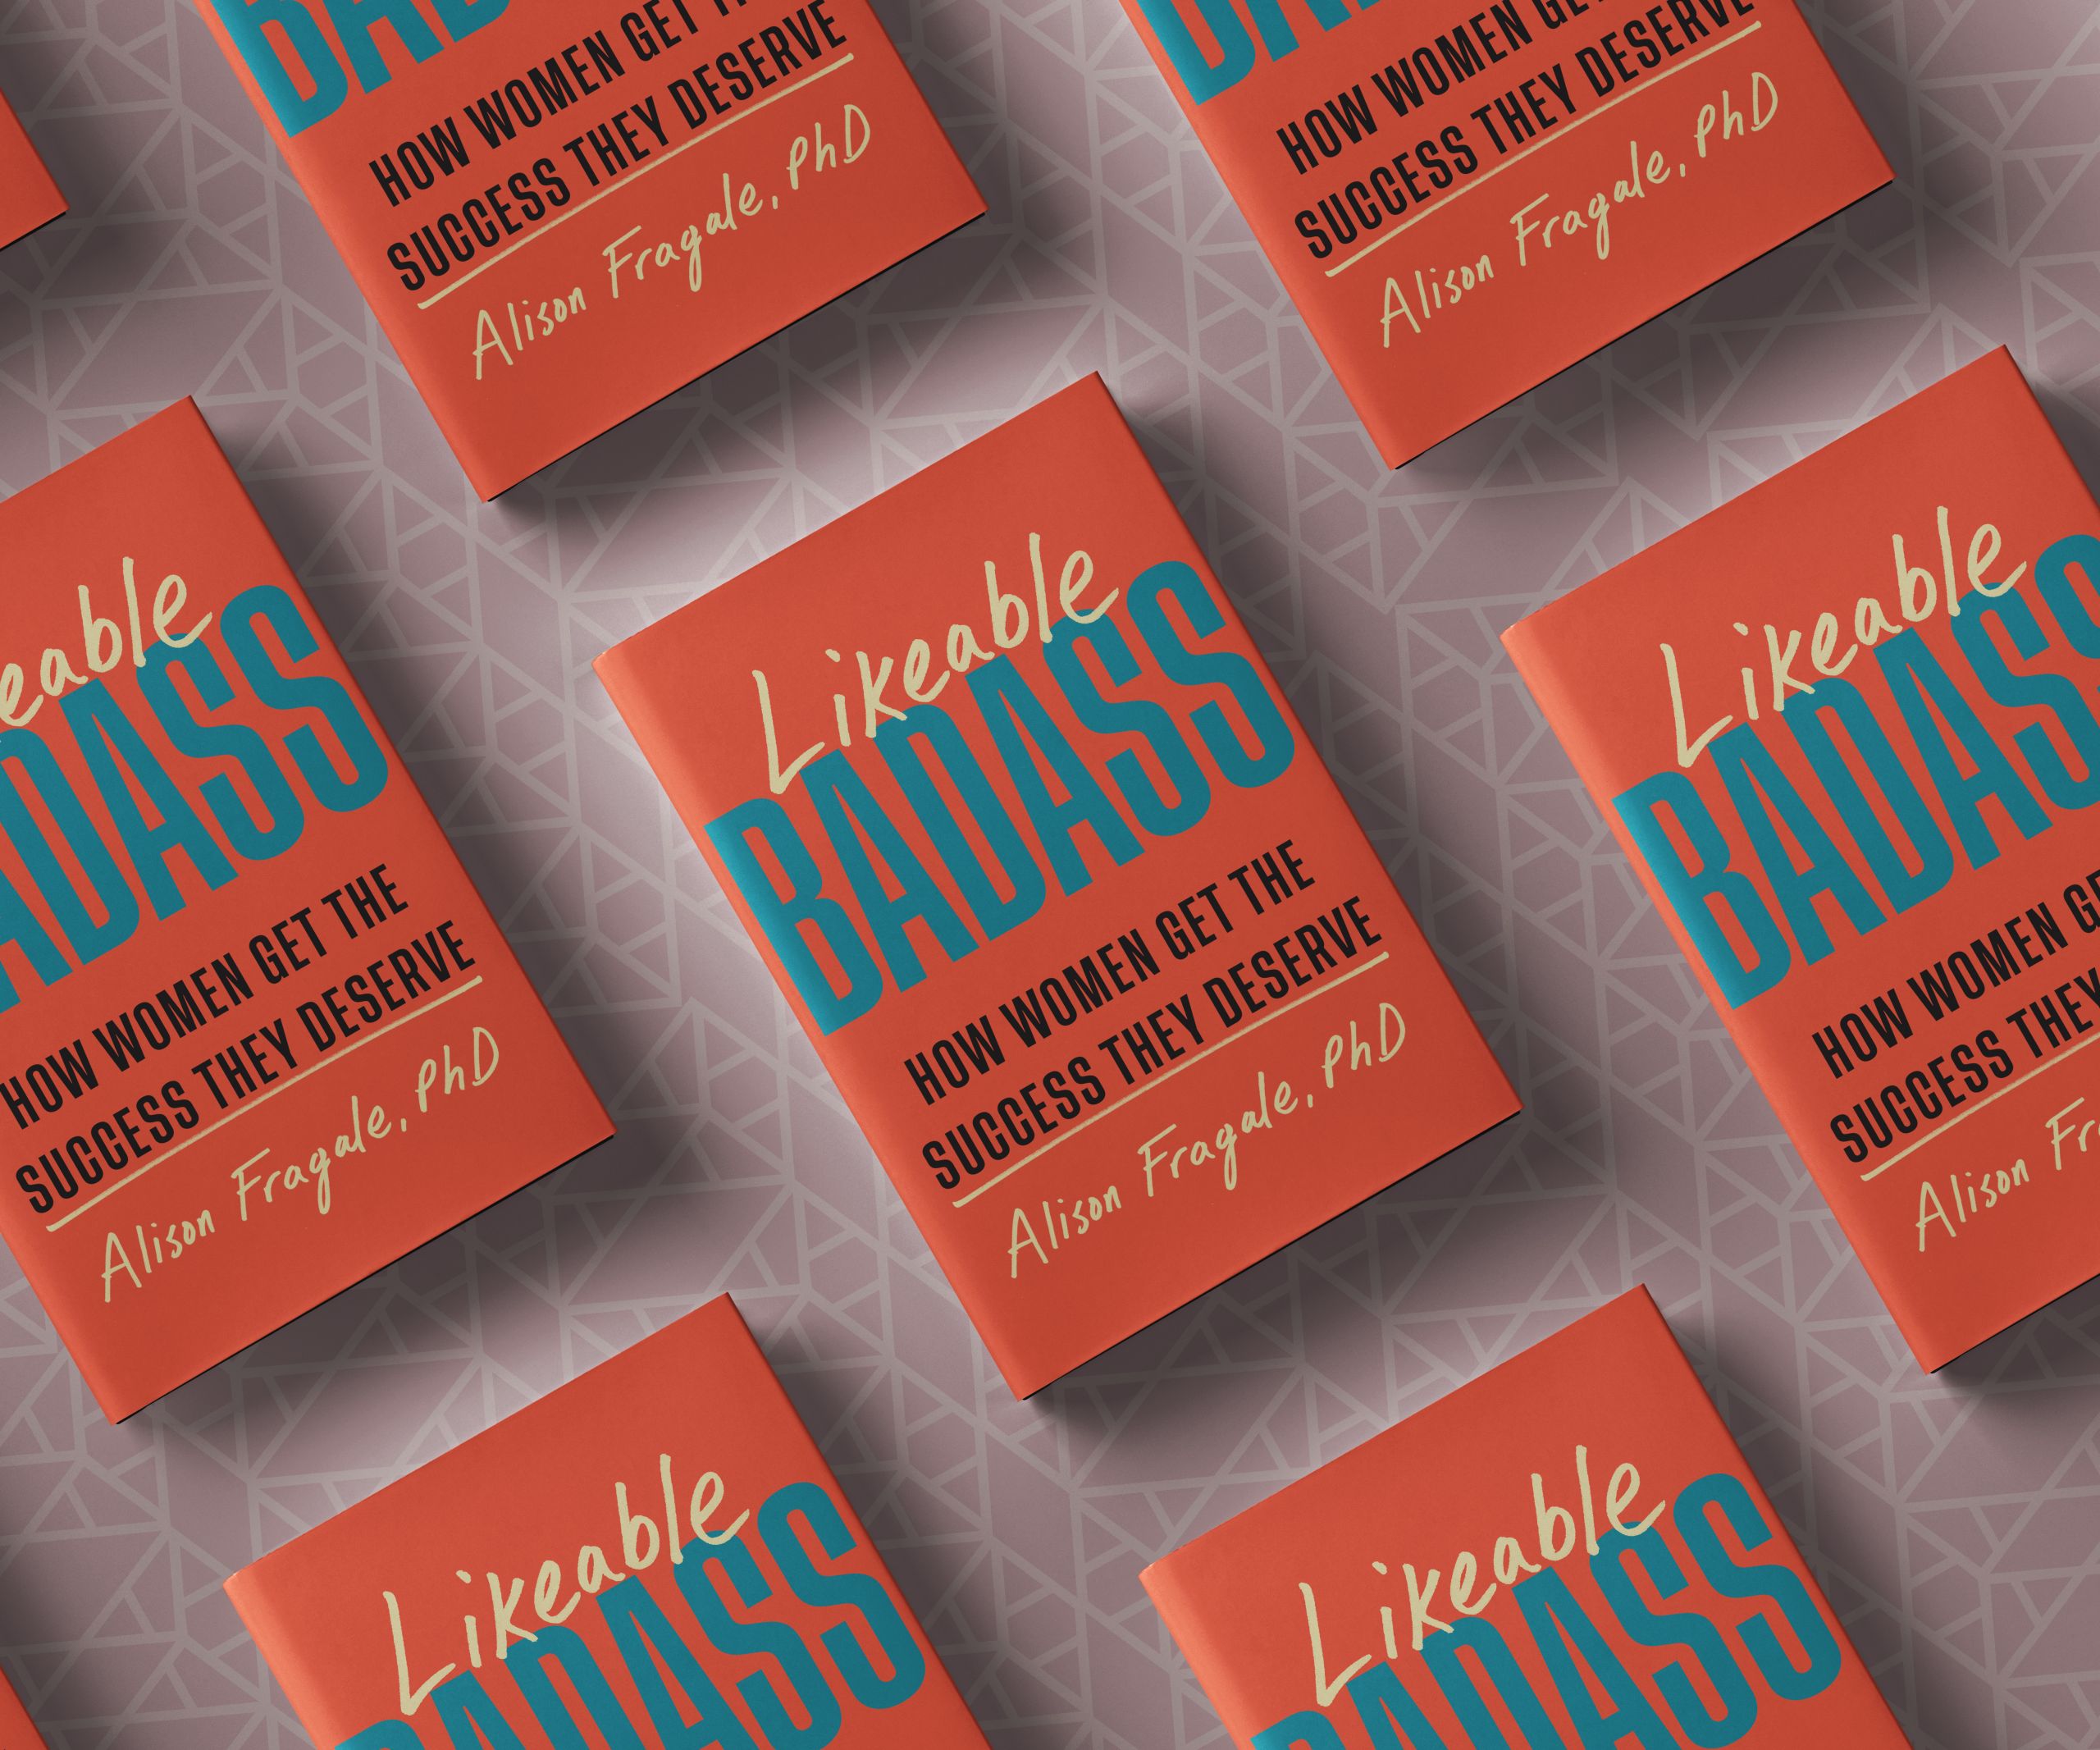 Likeable Badass books on a pink patterned background